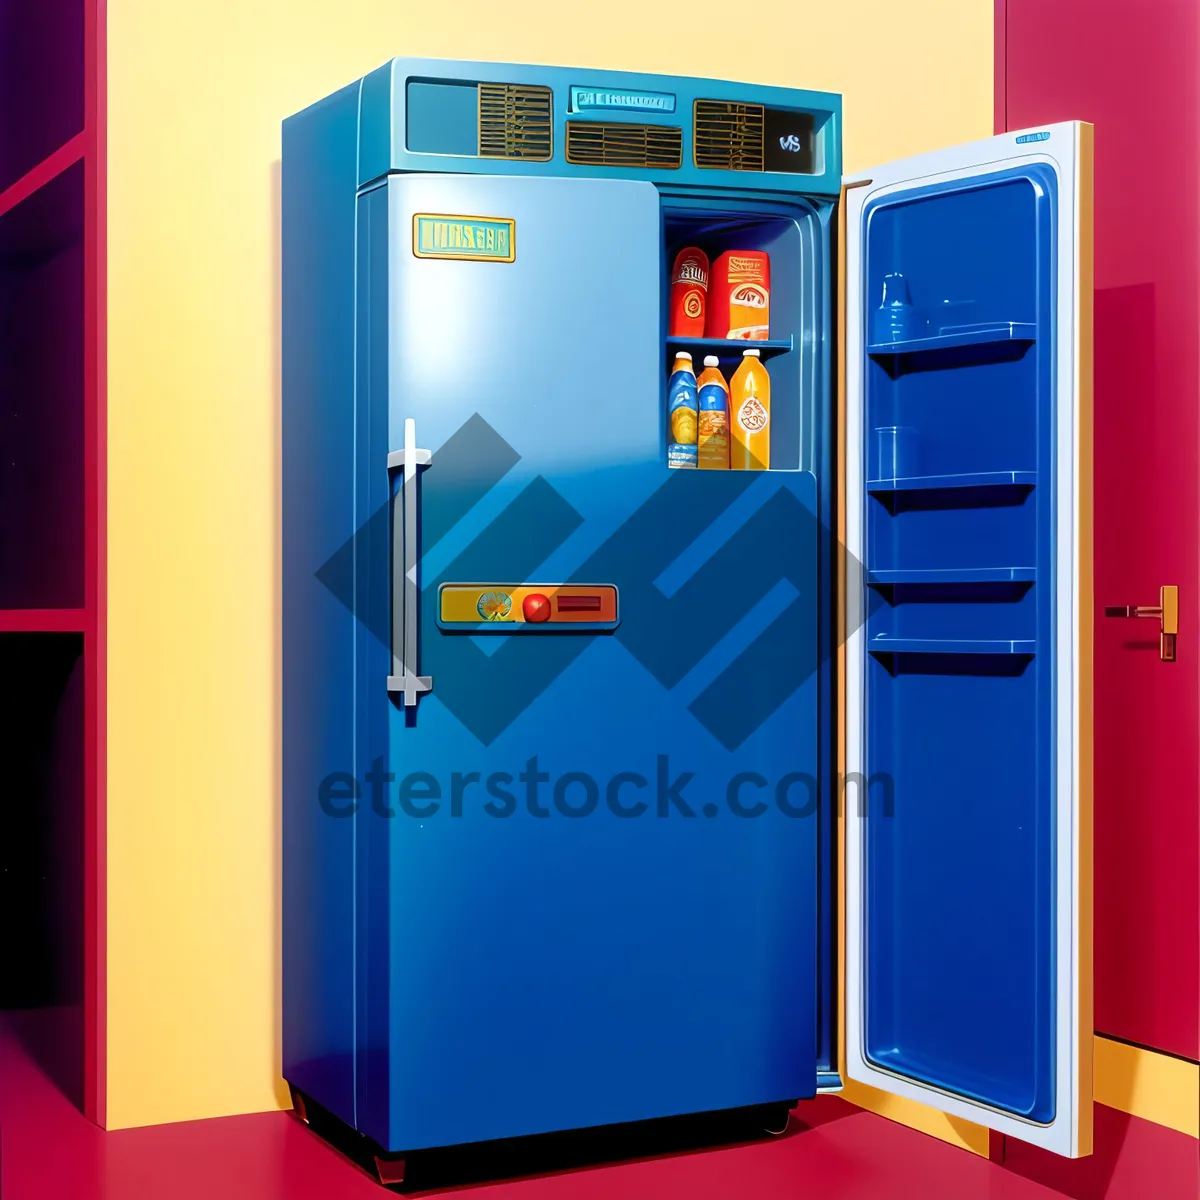 Picture of Efficient Business Refrigeration System for Office Vending Machines.